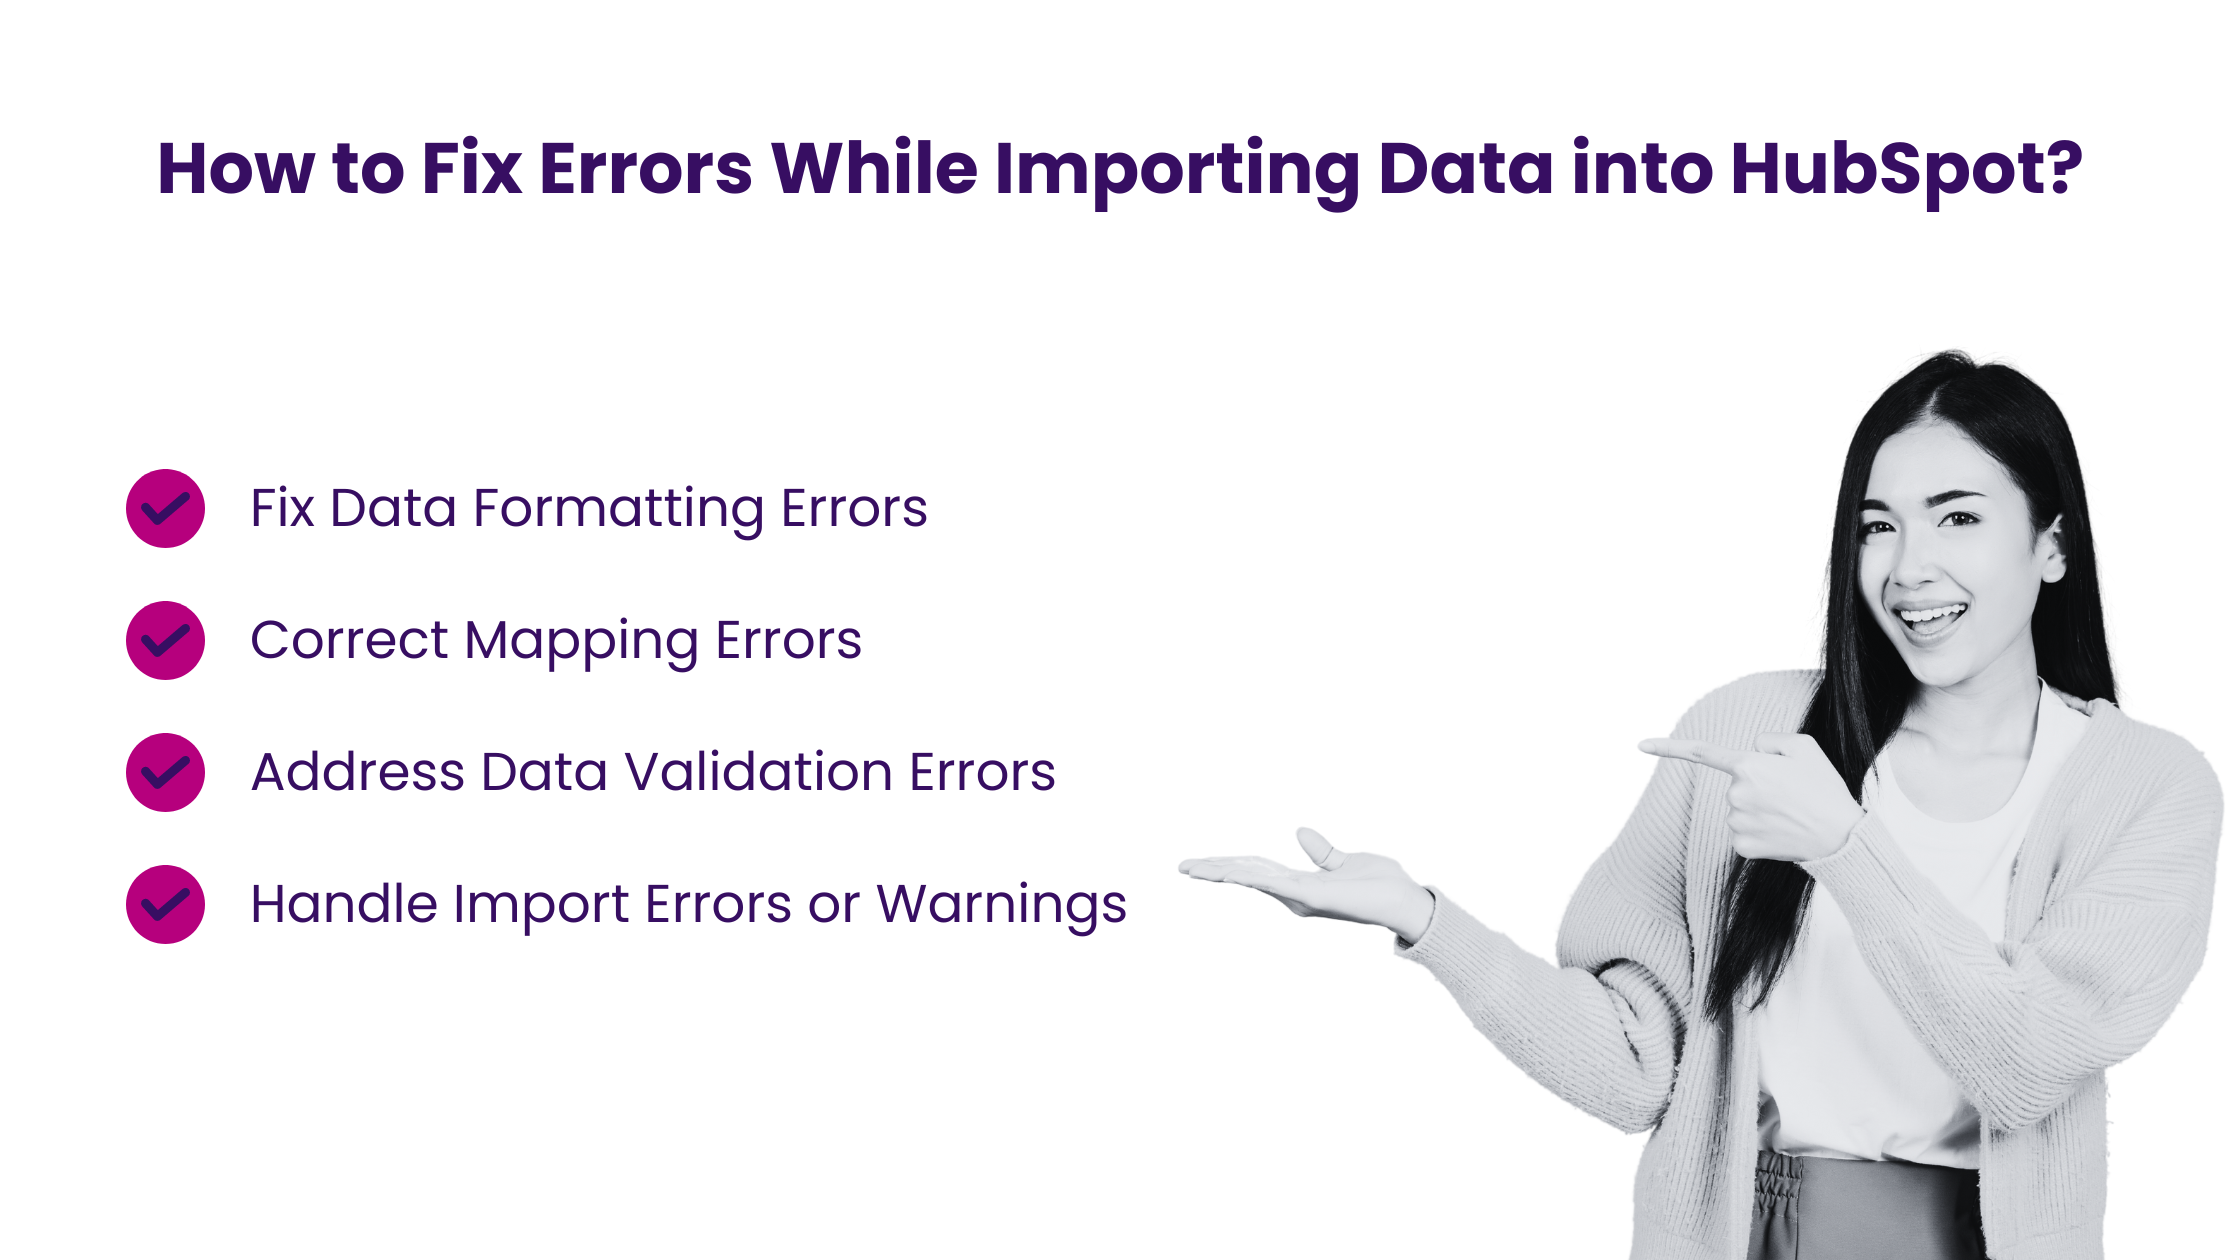 How to Fix Errors While Importing Data into HubSpot